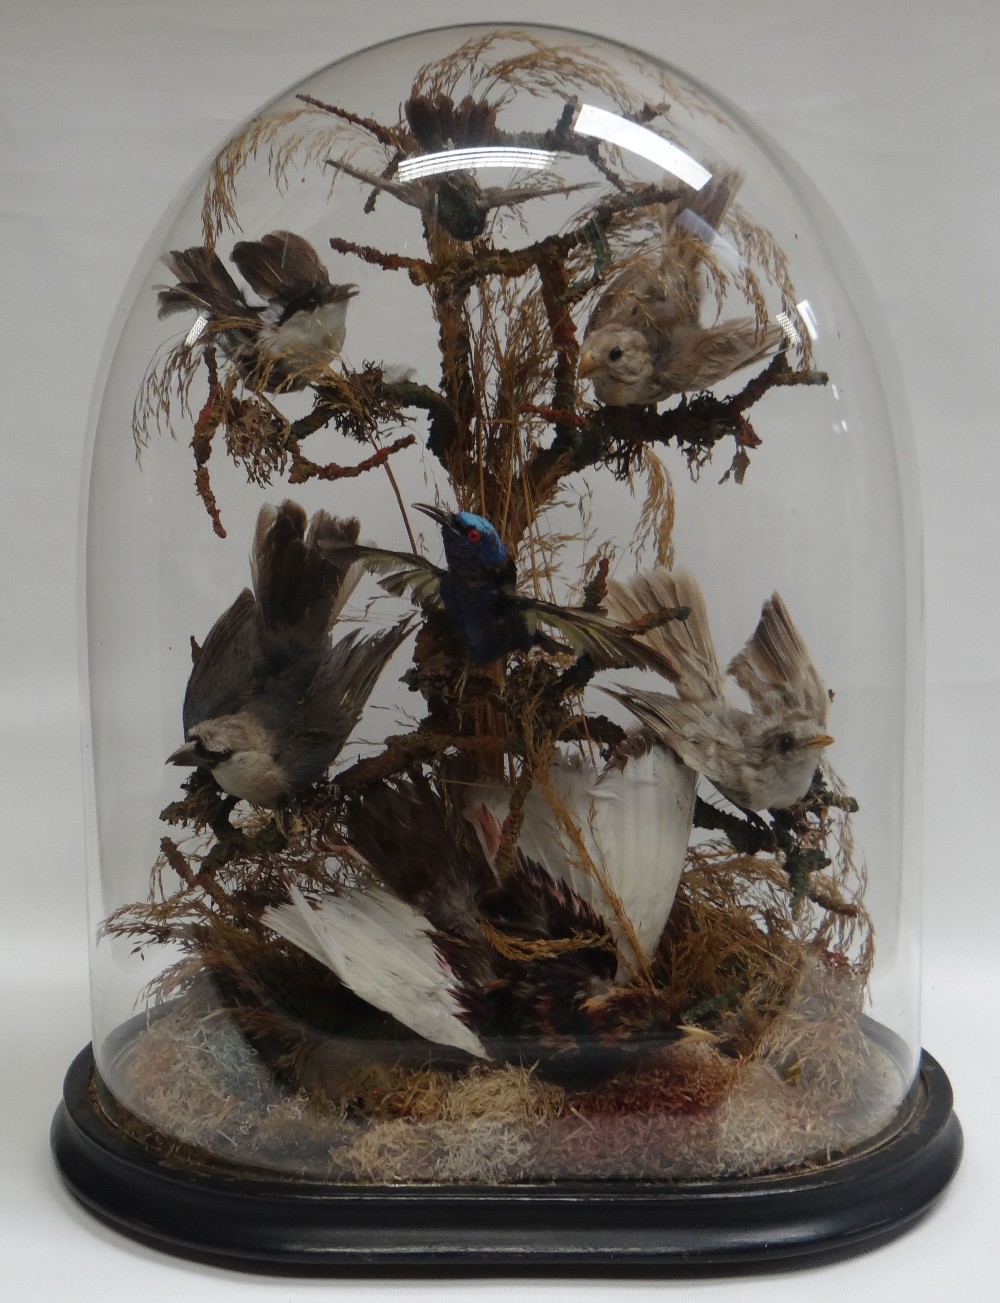 A LATE VICTORIAN / EARLY TWENTIETH CENTURY TAXIDERMY GLASS DOME of oval-based form and containing